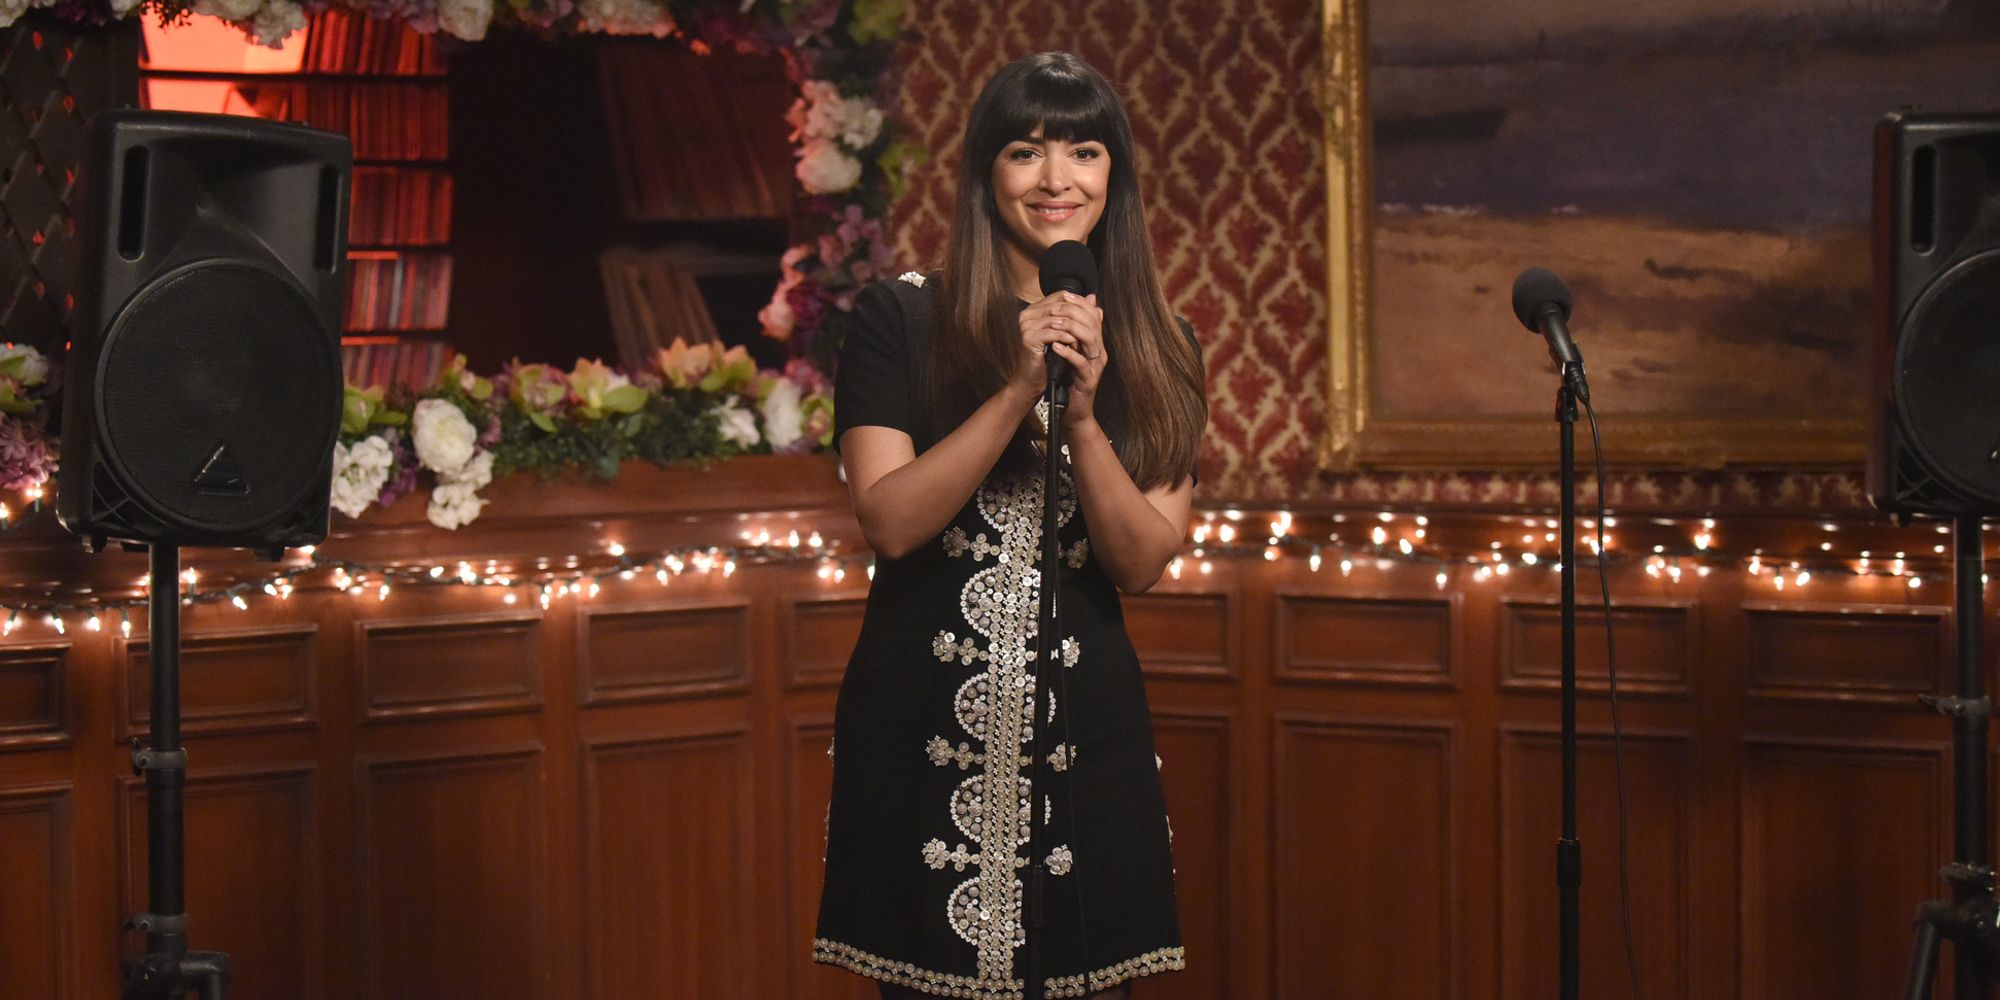 New Girl Series Finale Review: A Sweet Farewell That Distills The Show’s Best Parts